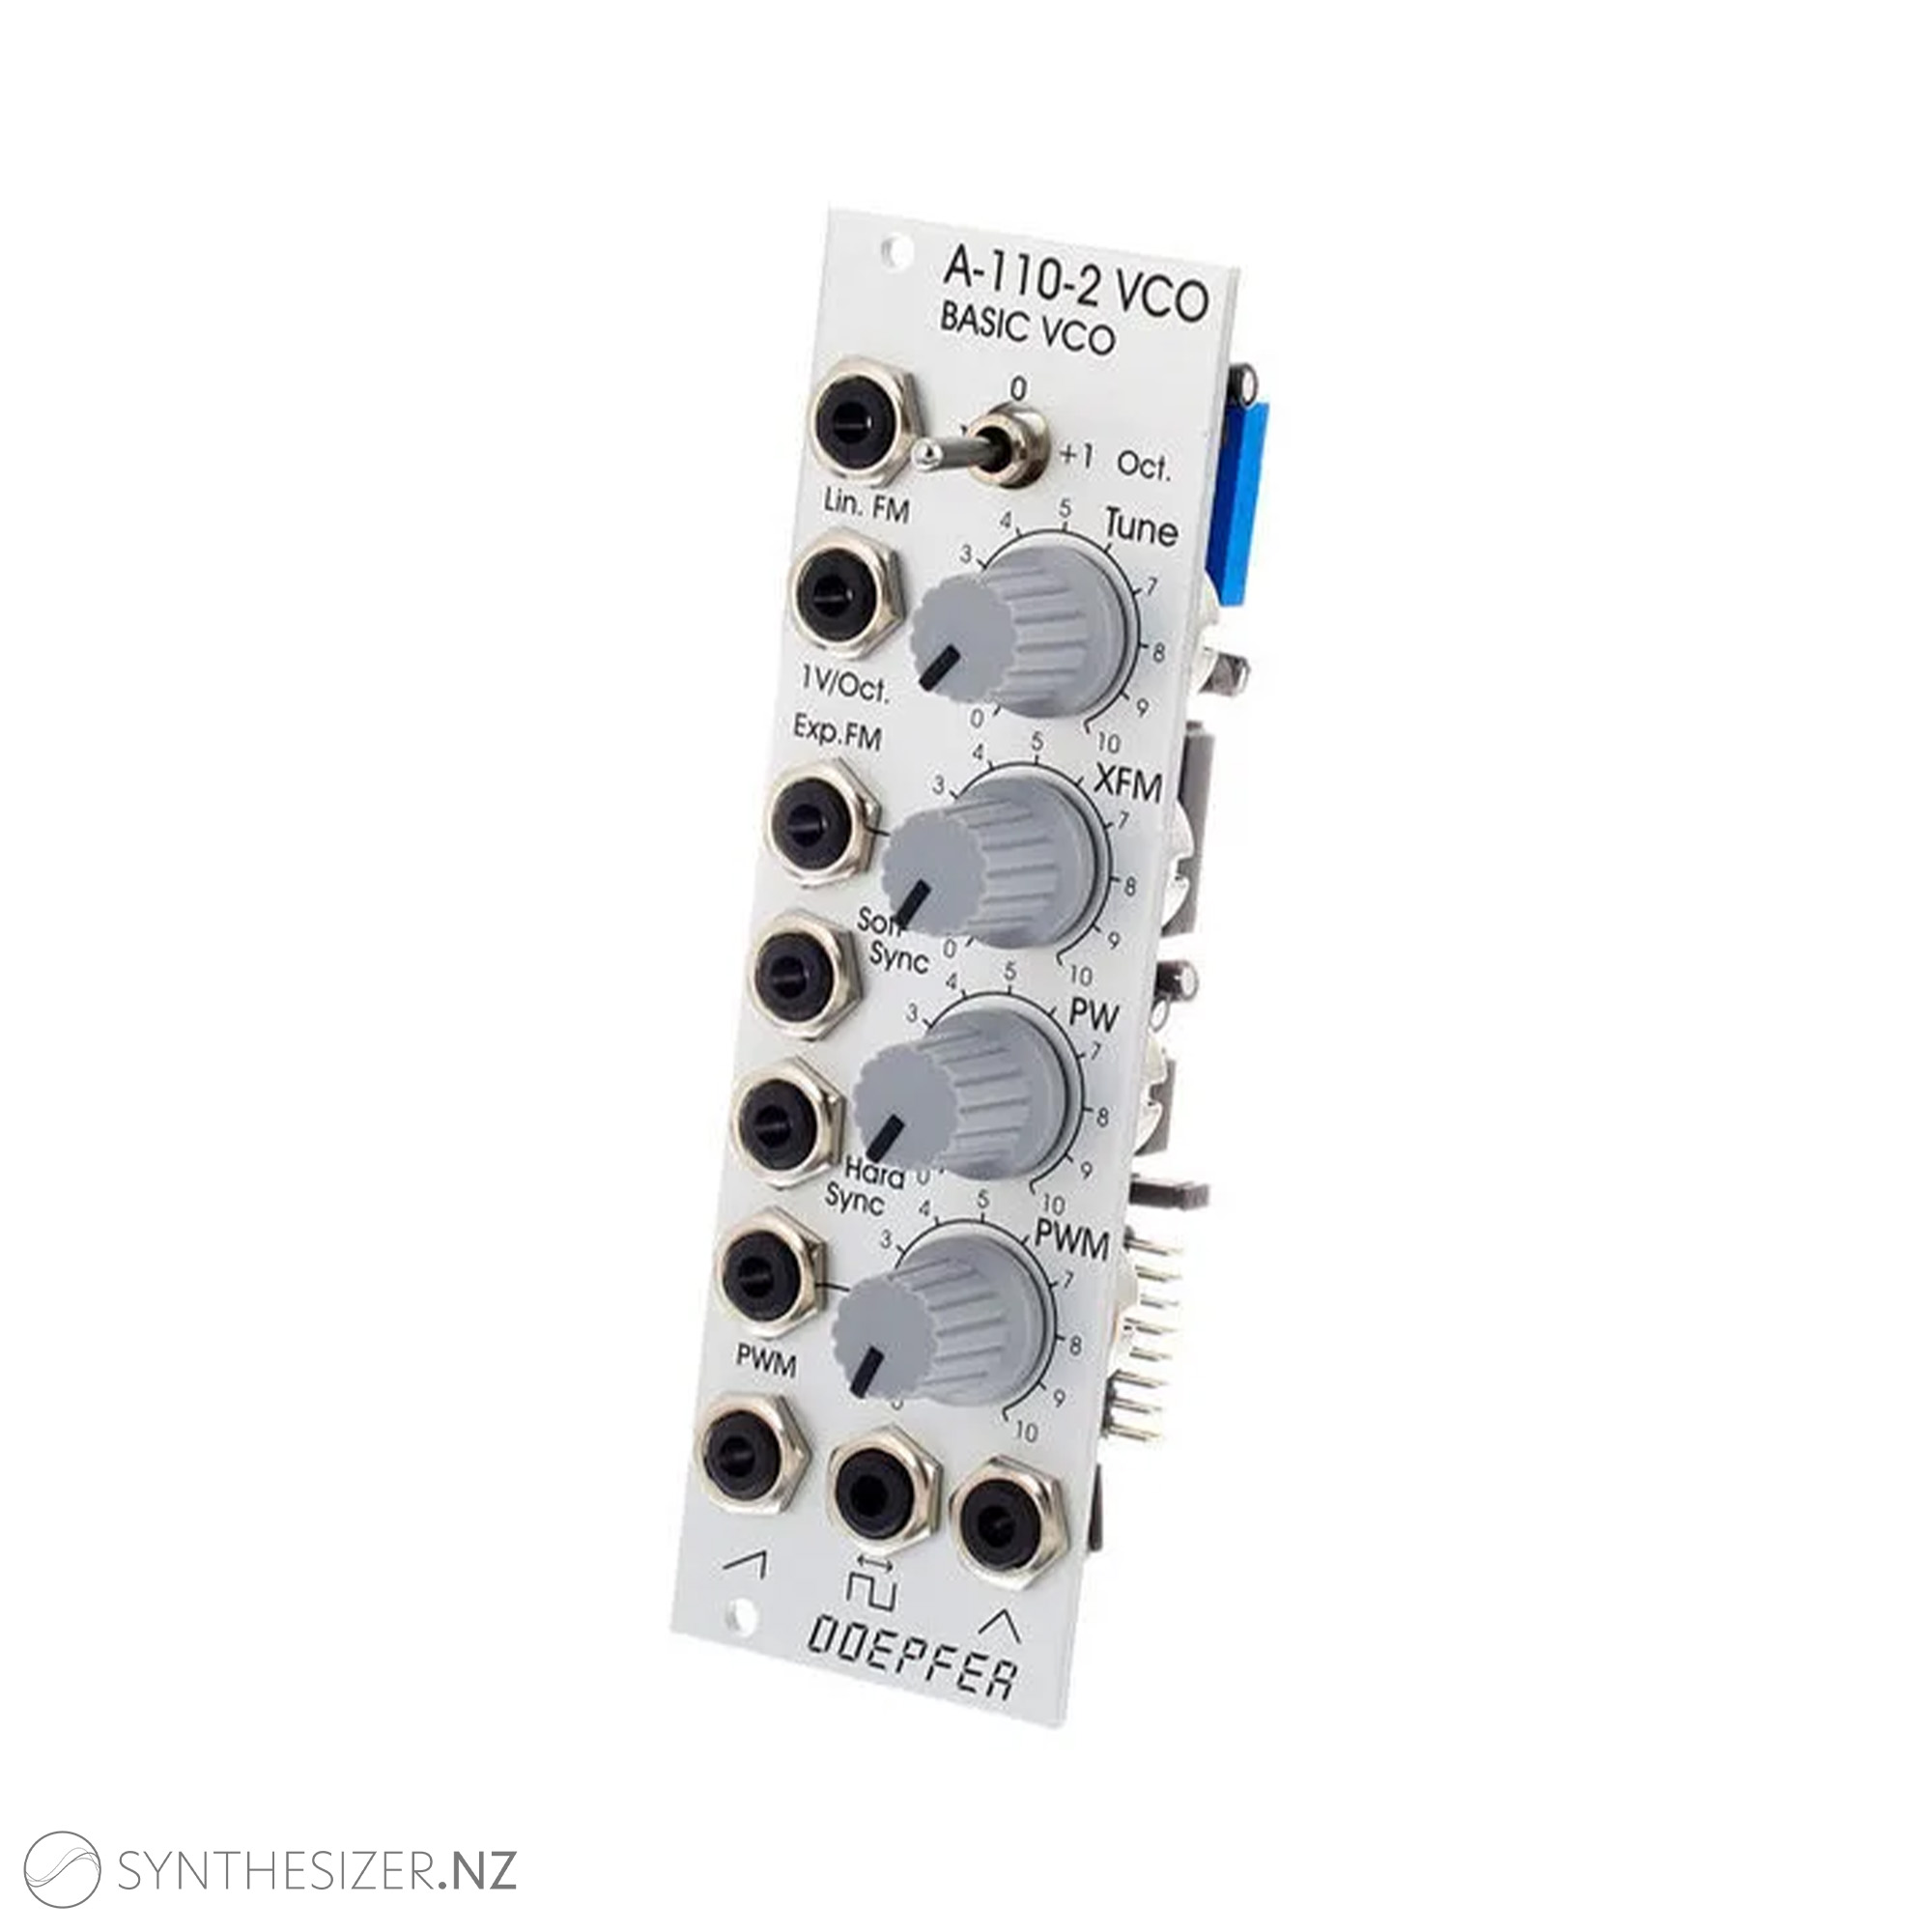 Doepfer A-110-2 VCO a cheap and simple oscillator for your